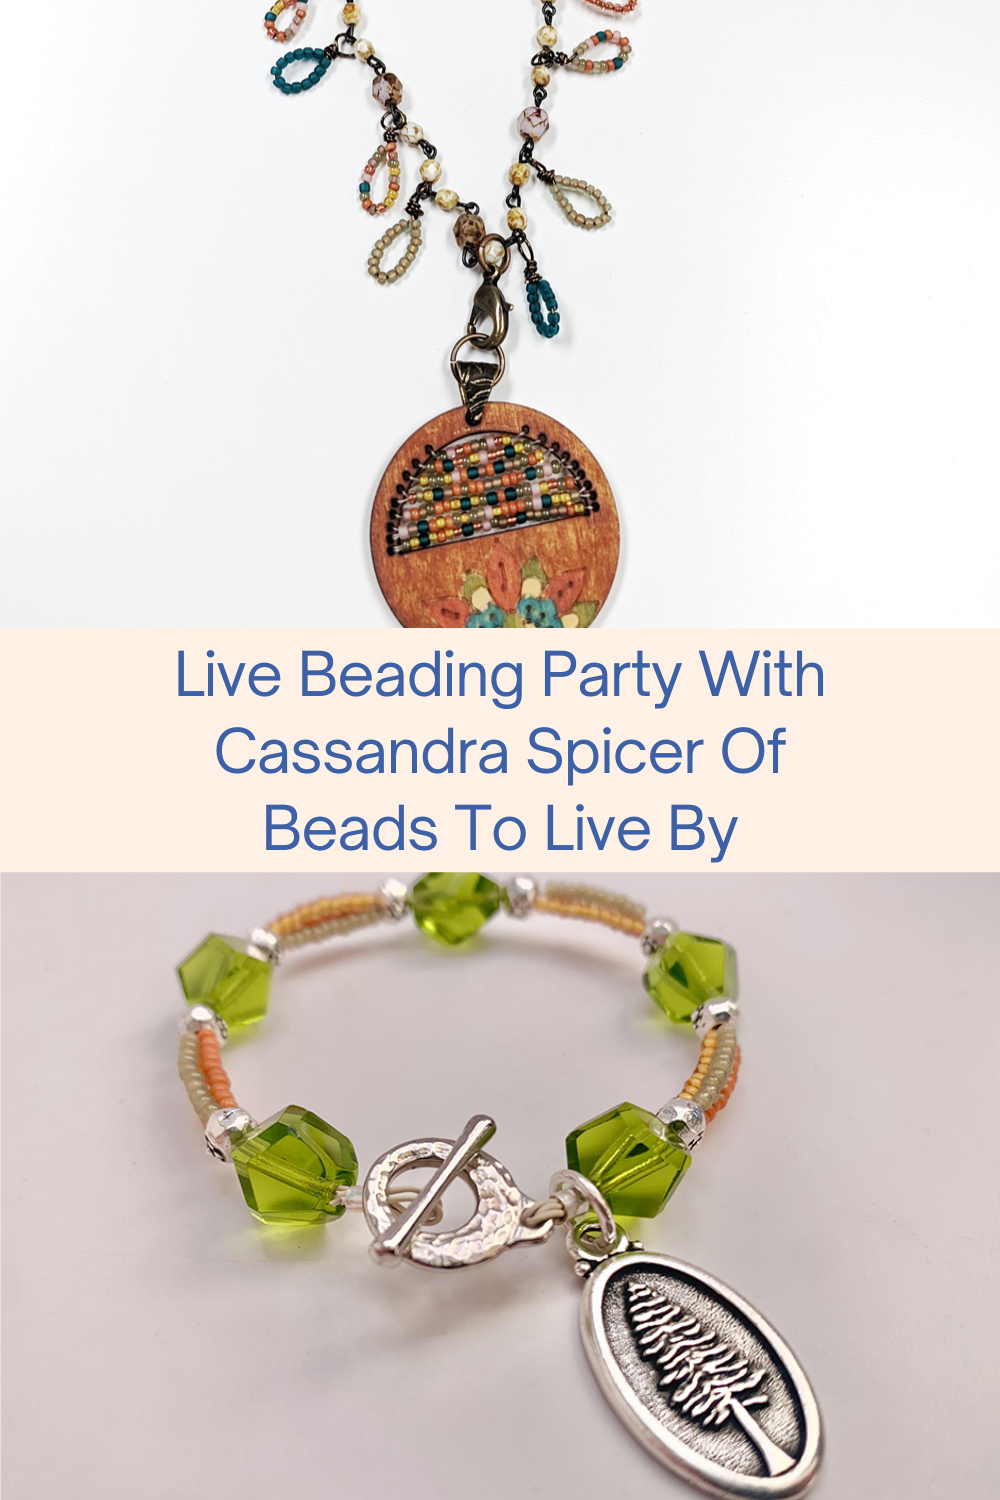 Live Beading Party With Cassandra Spicer Of Beads To Live By Collage